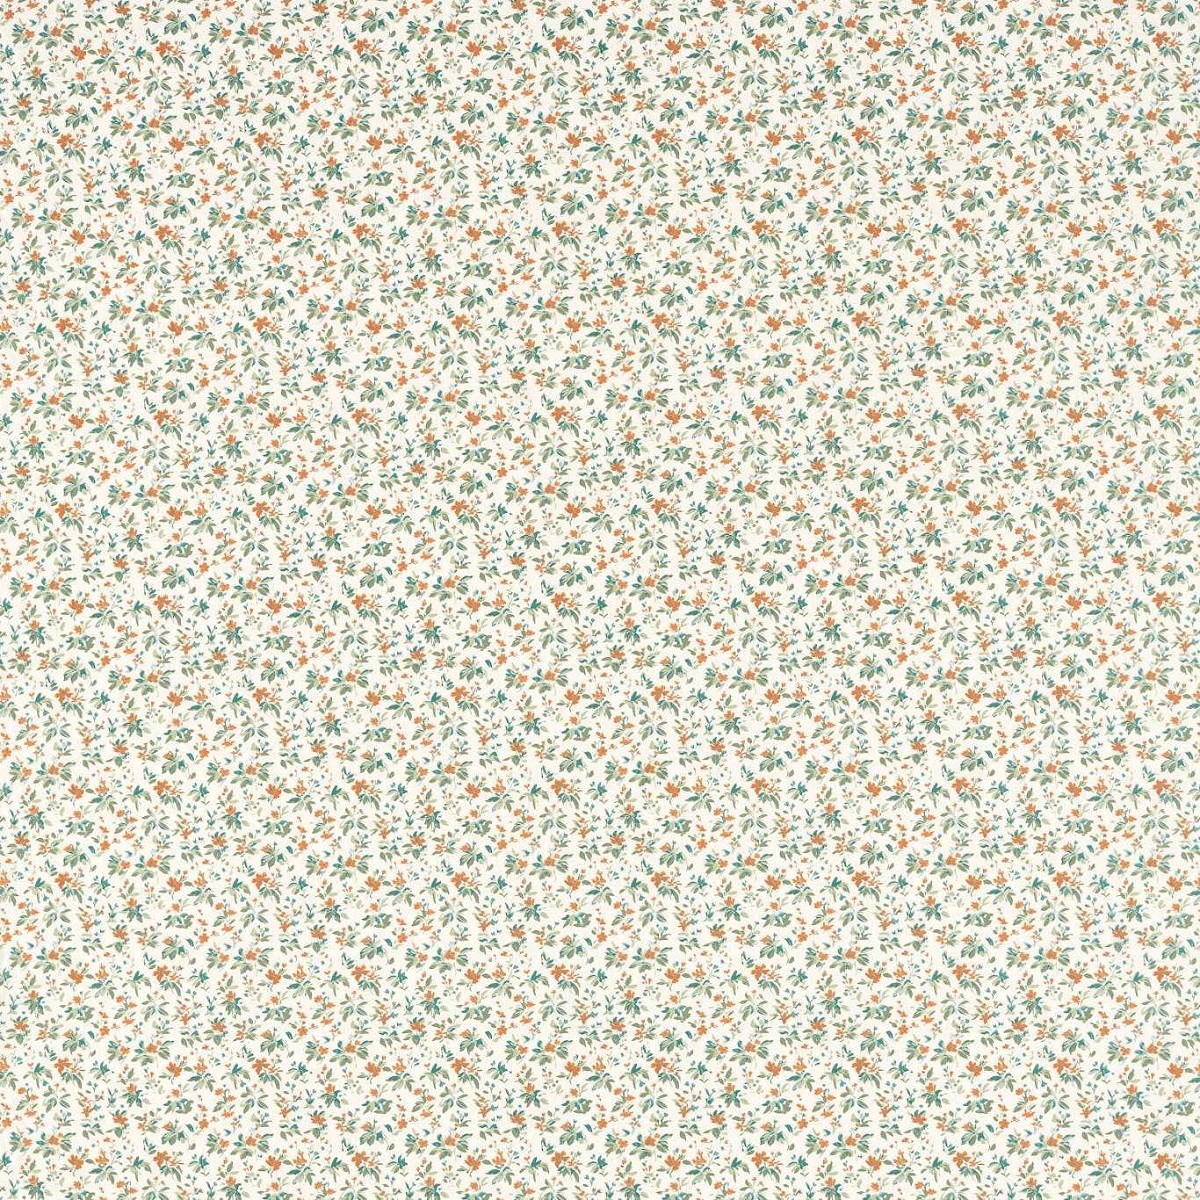 Thetford Teal/Spice Fabric by Studio G